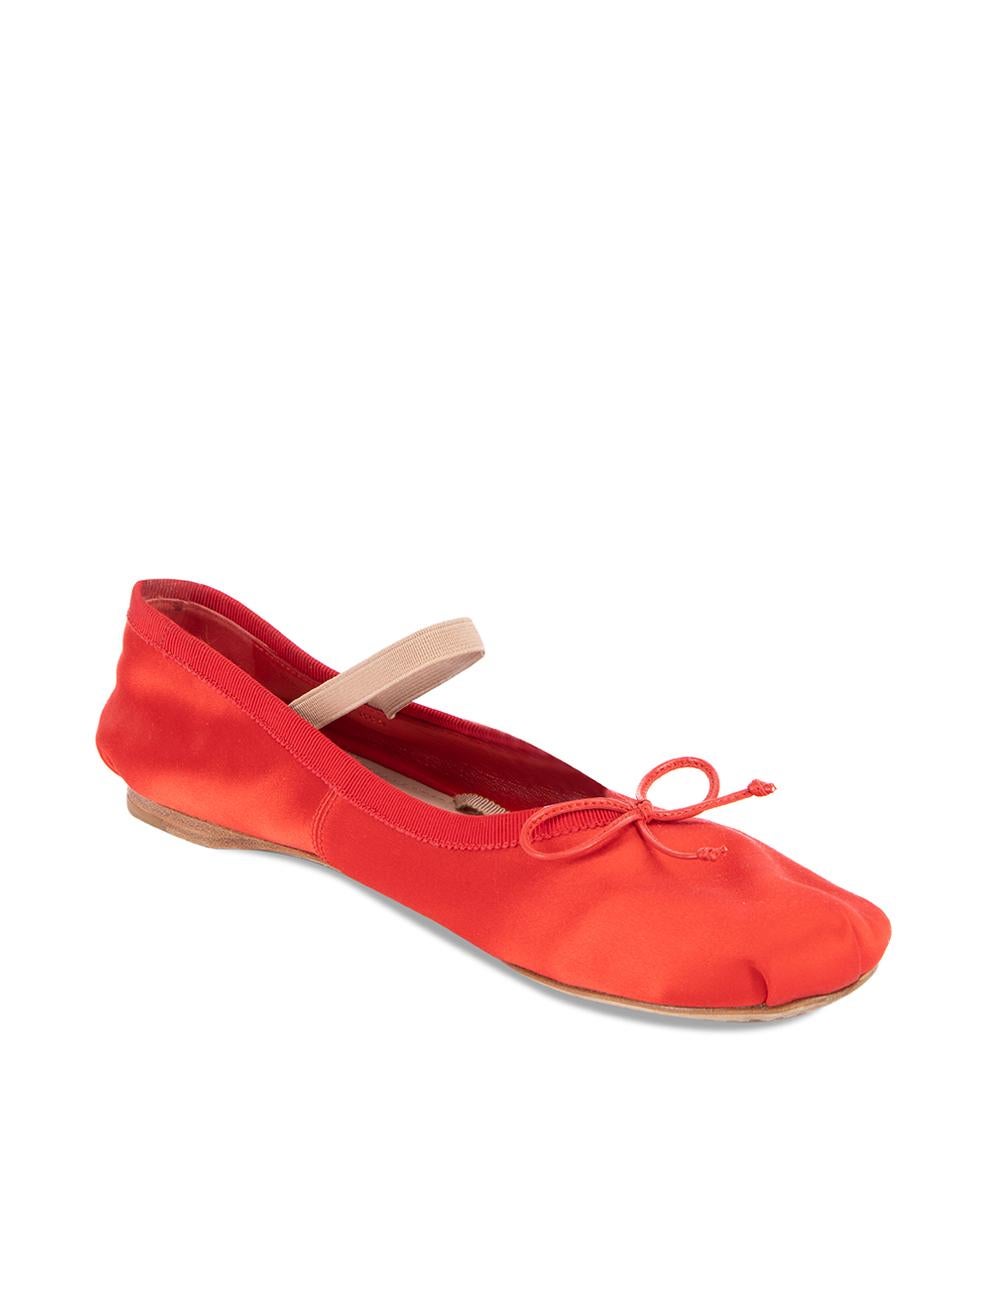 CONDITION is Very good. Minimal wear to flats is evident. Minimal wear to on this used Miu Miu designer resale item. Details Red Satin Ballet flats Round toe Flat heel Bow accent on cap toe Elasticated strap Leather interior Made in Italy